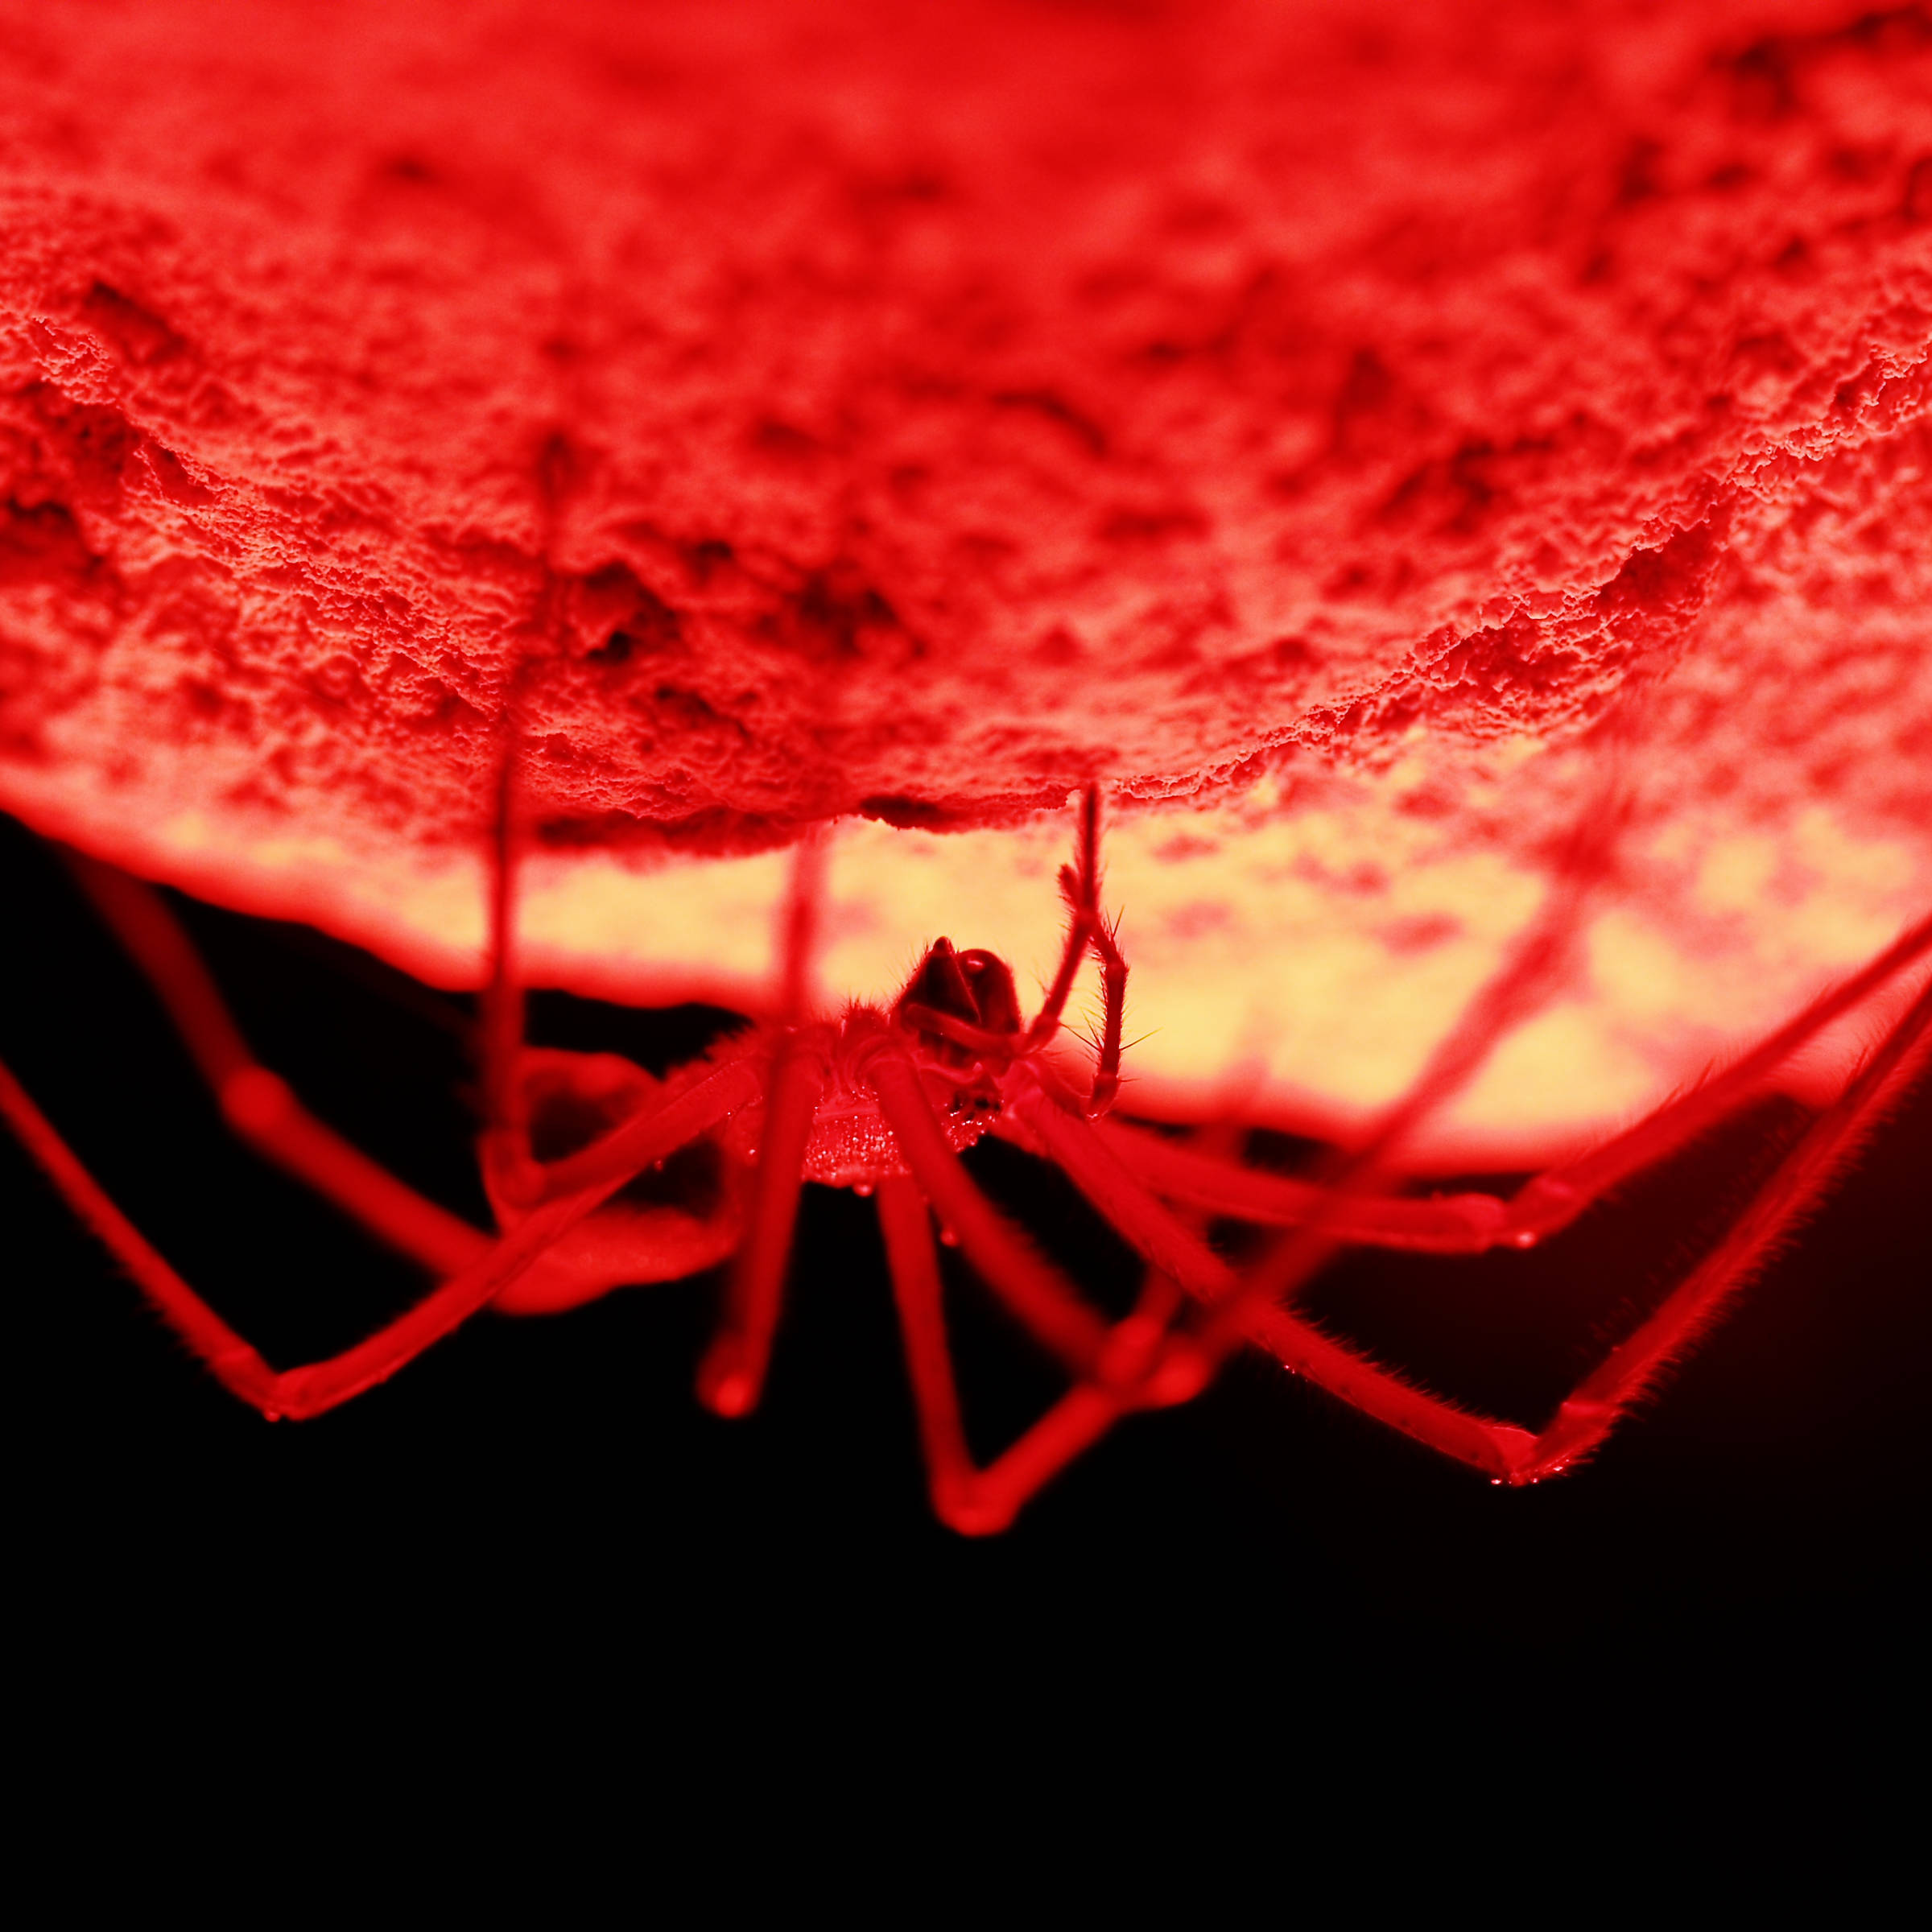 The Tasmania cave spider, walking along the roof of a cave. The spider is lit by a bright red light creating a strong silhouette against the black of the background. Photo: Joe Shemesh.